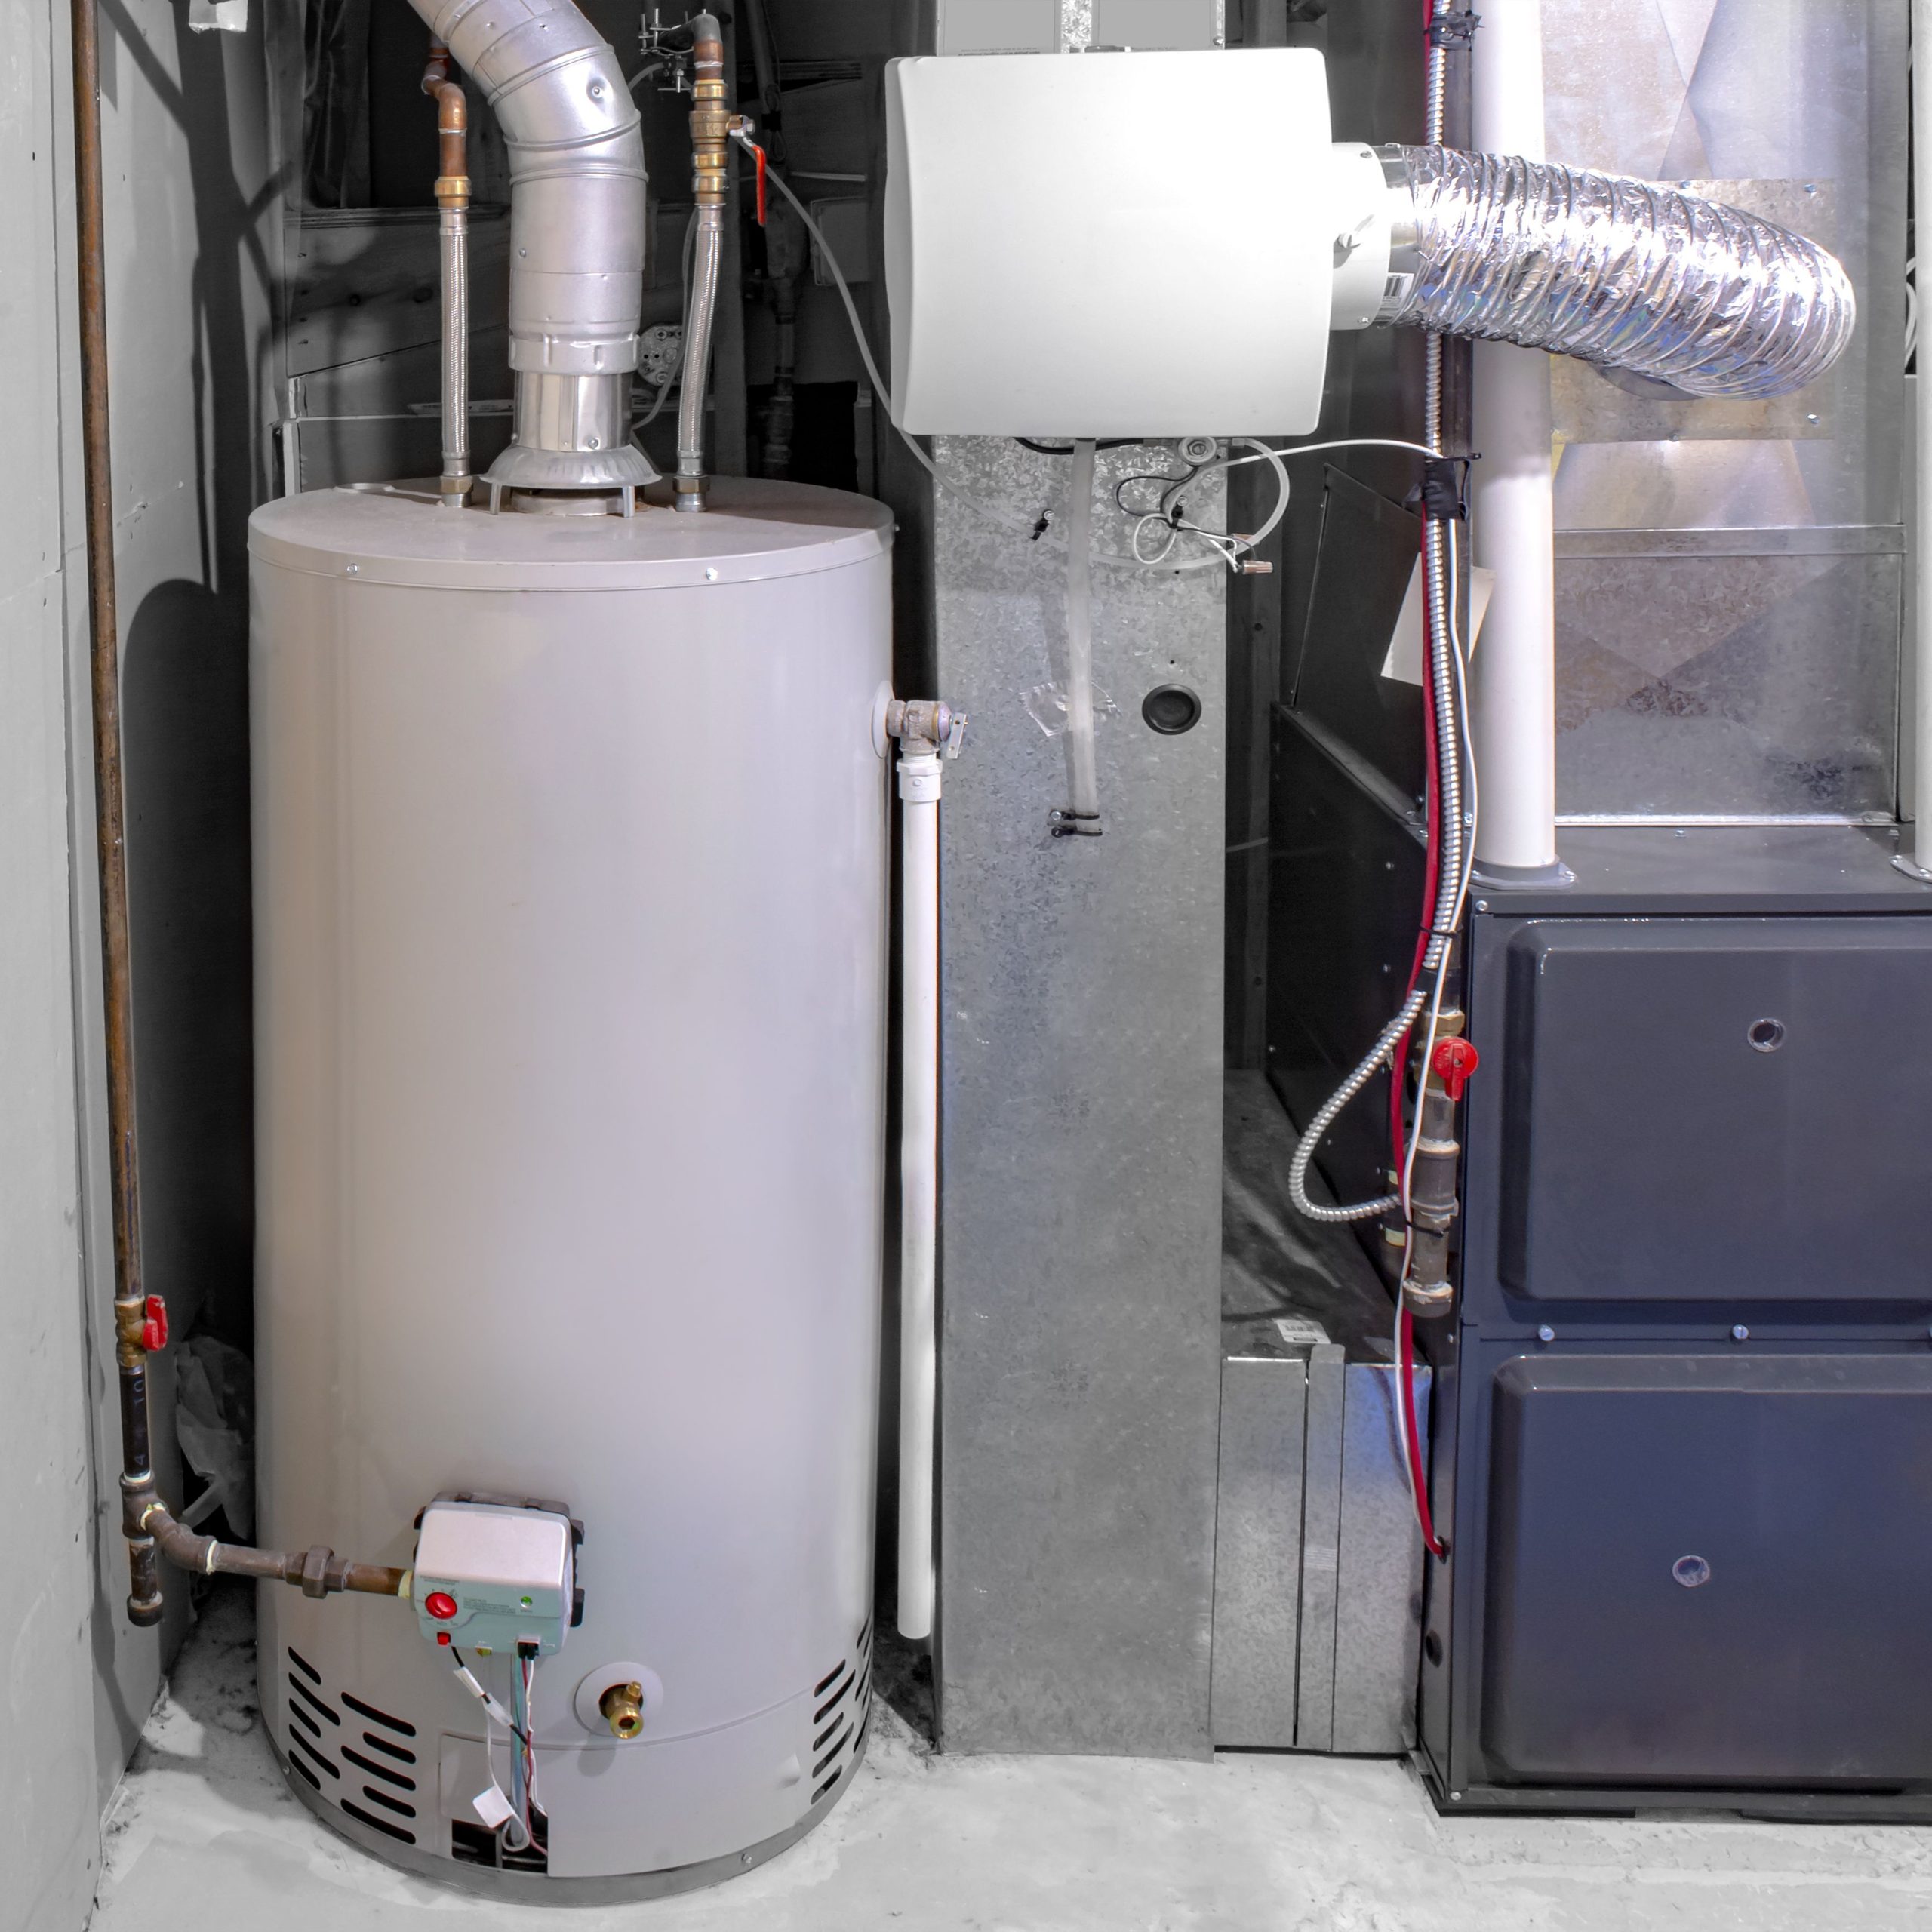 Water Heater’s Service from Mr Drain Plumbing